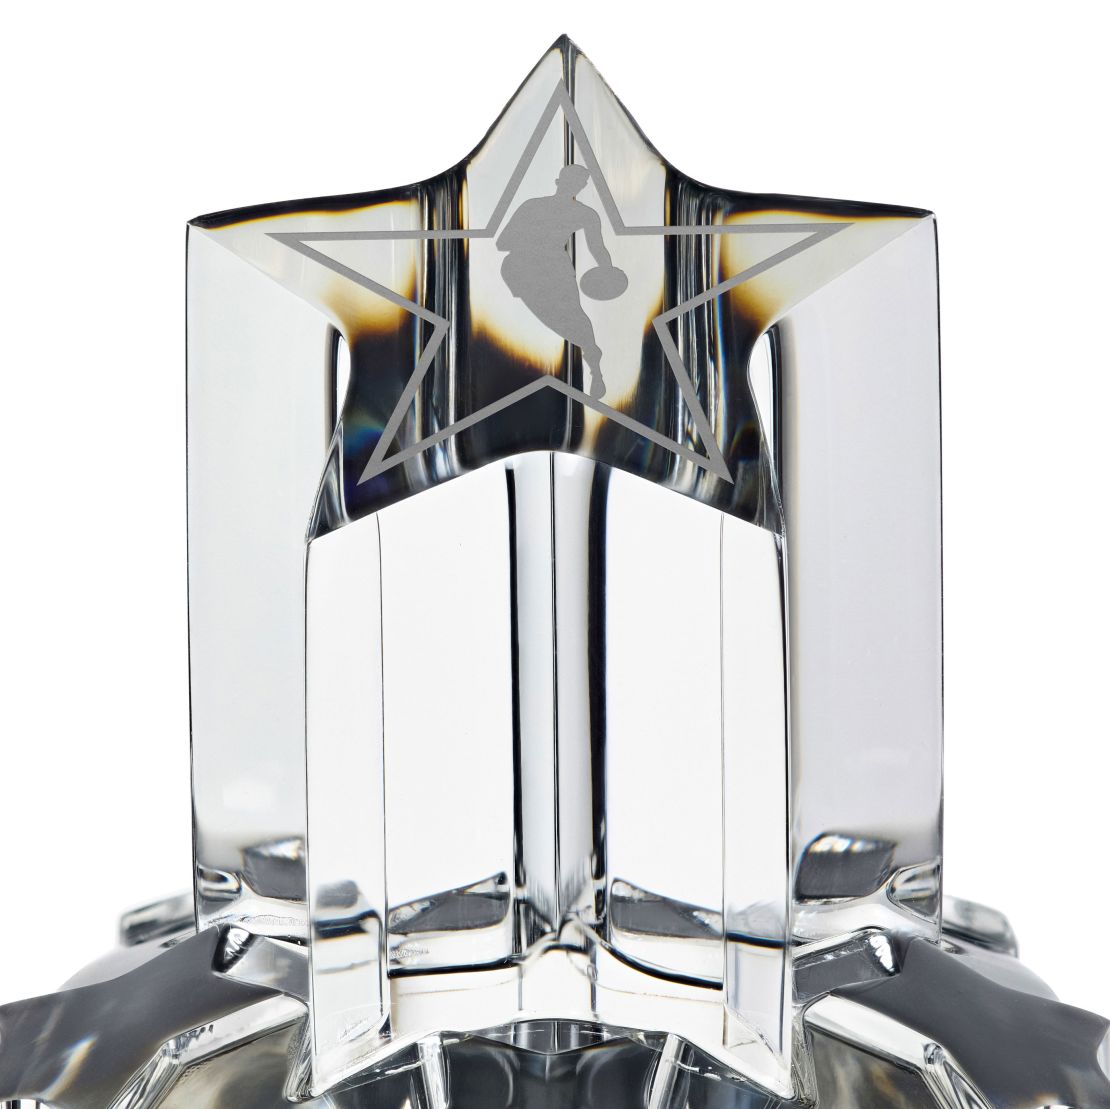 A photo of the top tier of the new Kobe Bryant Trophy.